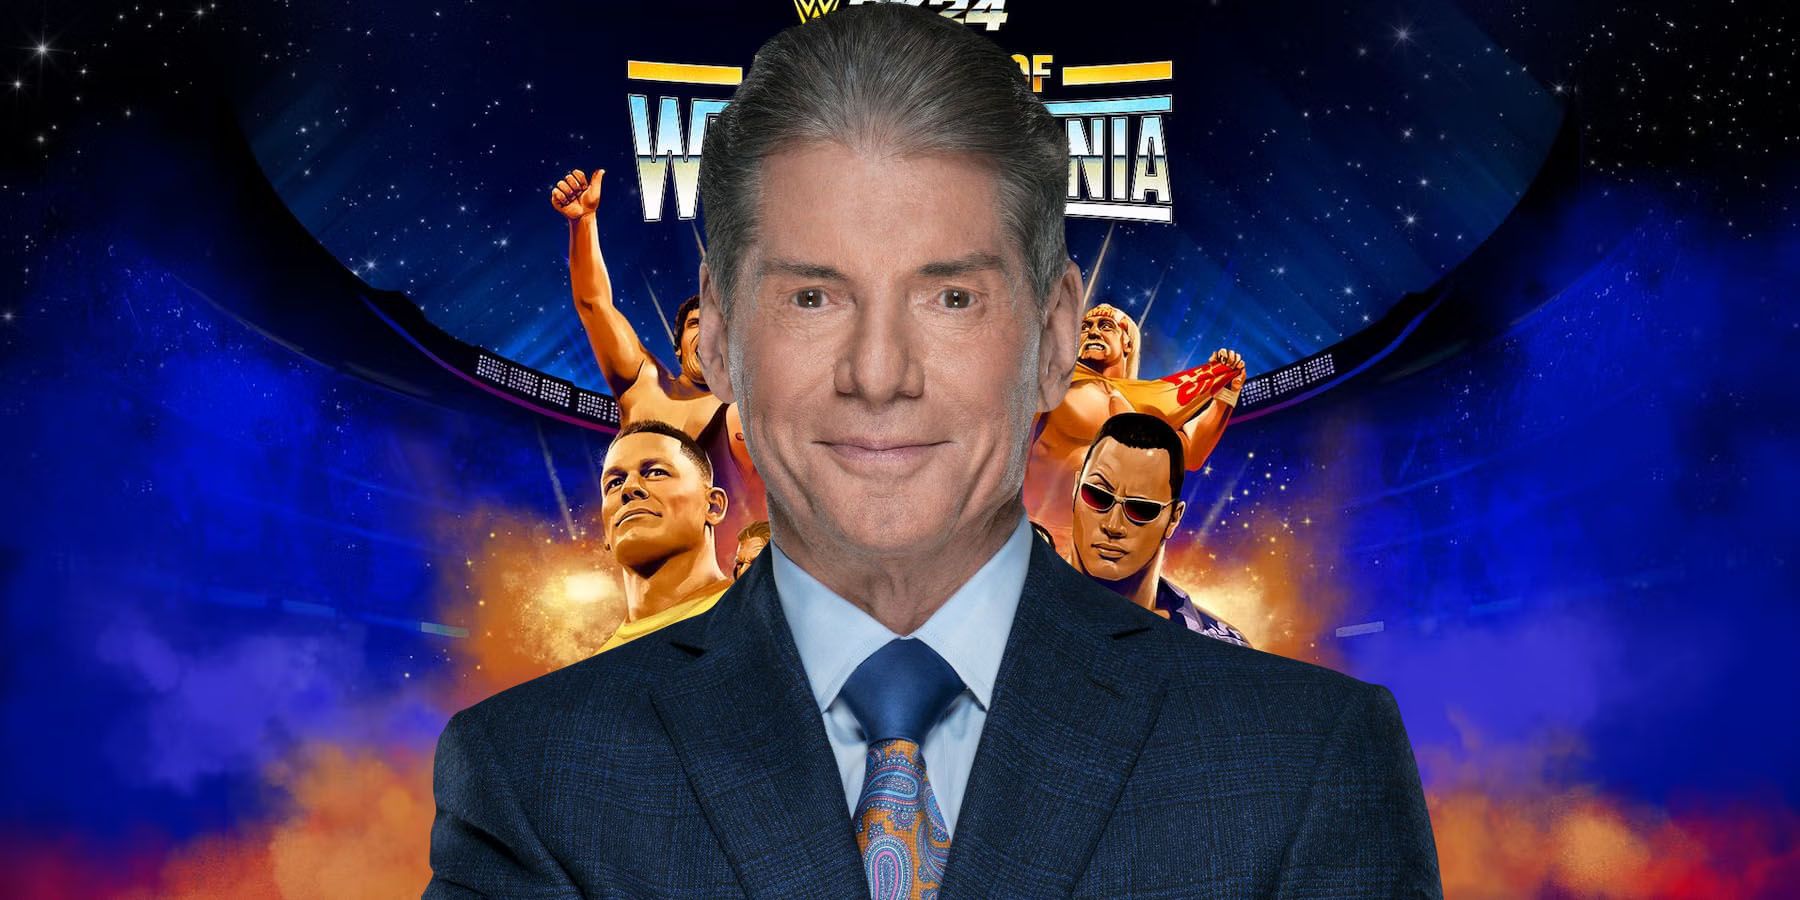 The digital cover for WWE 2K24 with Vince McMahon inserted in front.